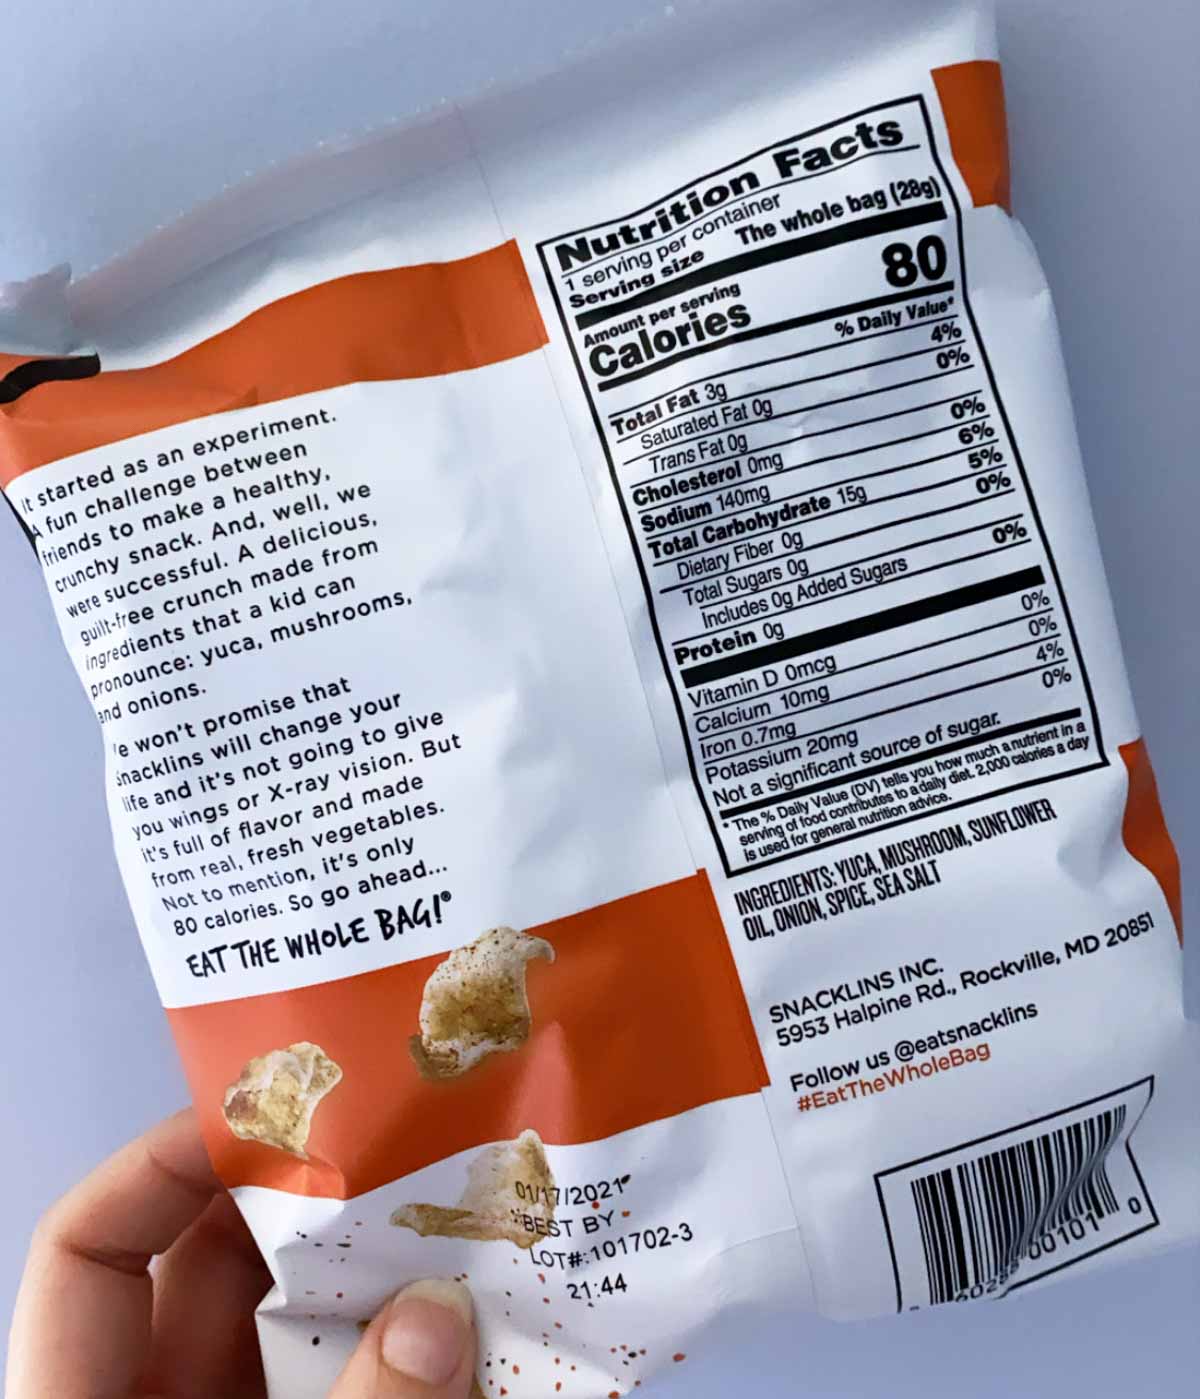 Back of chesapeake bay flavor of snacklins nutritional facts